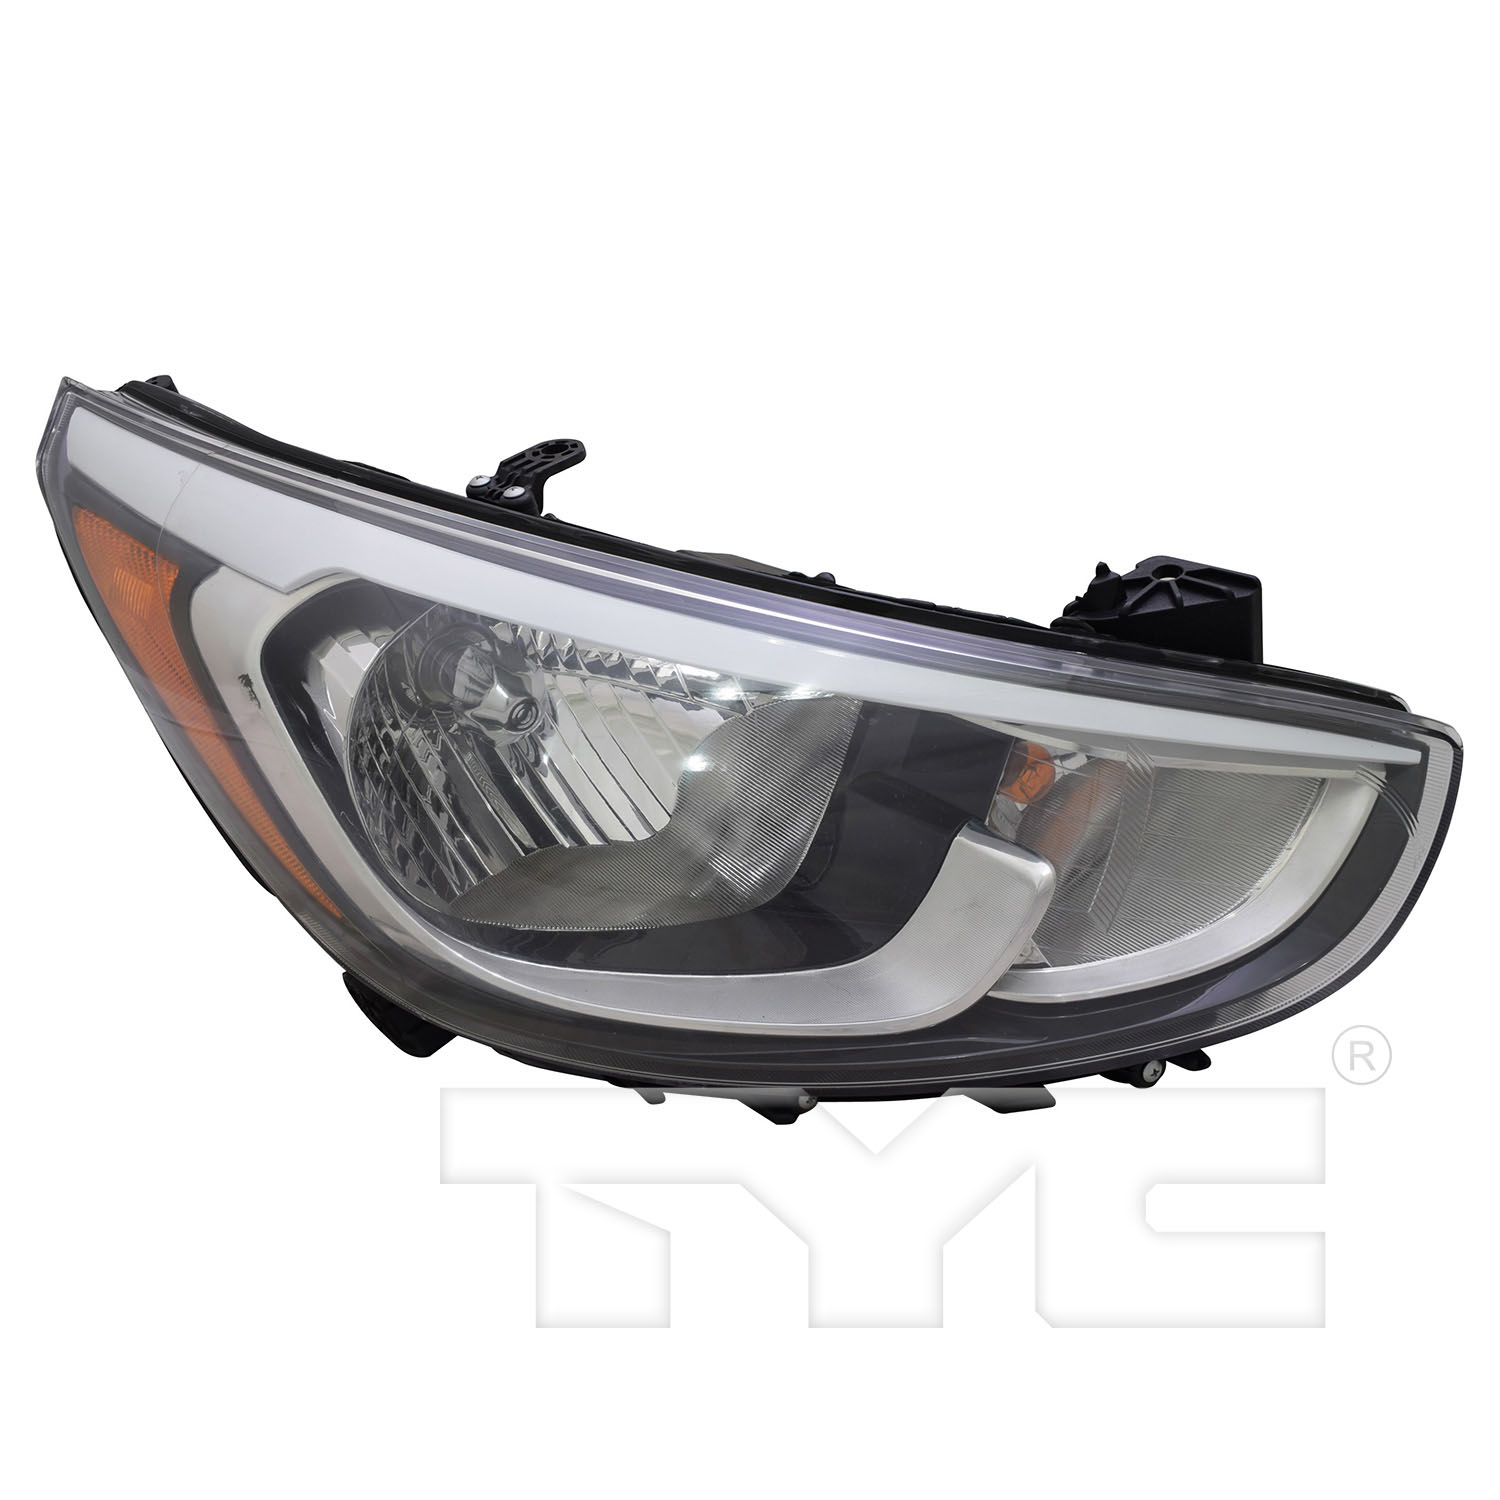 Aftermarket FOG LIGHTS for HYUNDAI - ACCENT, ACCENT,15-17,RT Headlamp assy composite